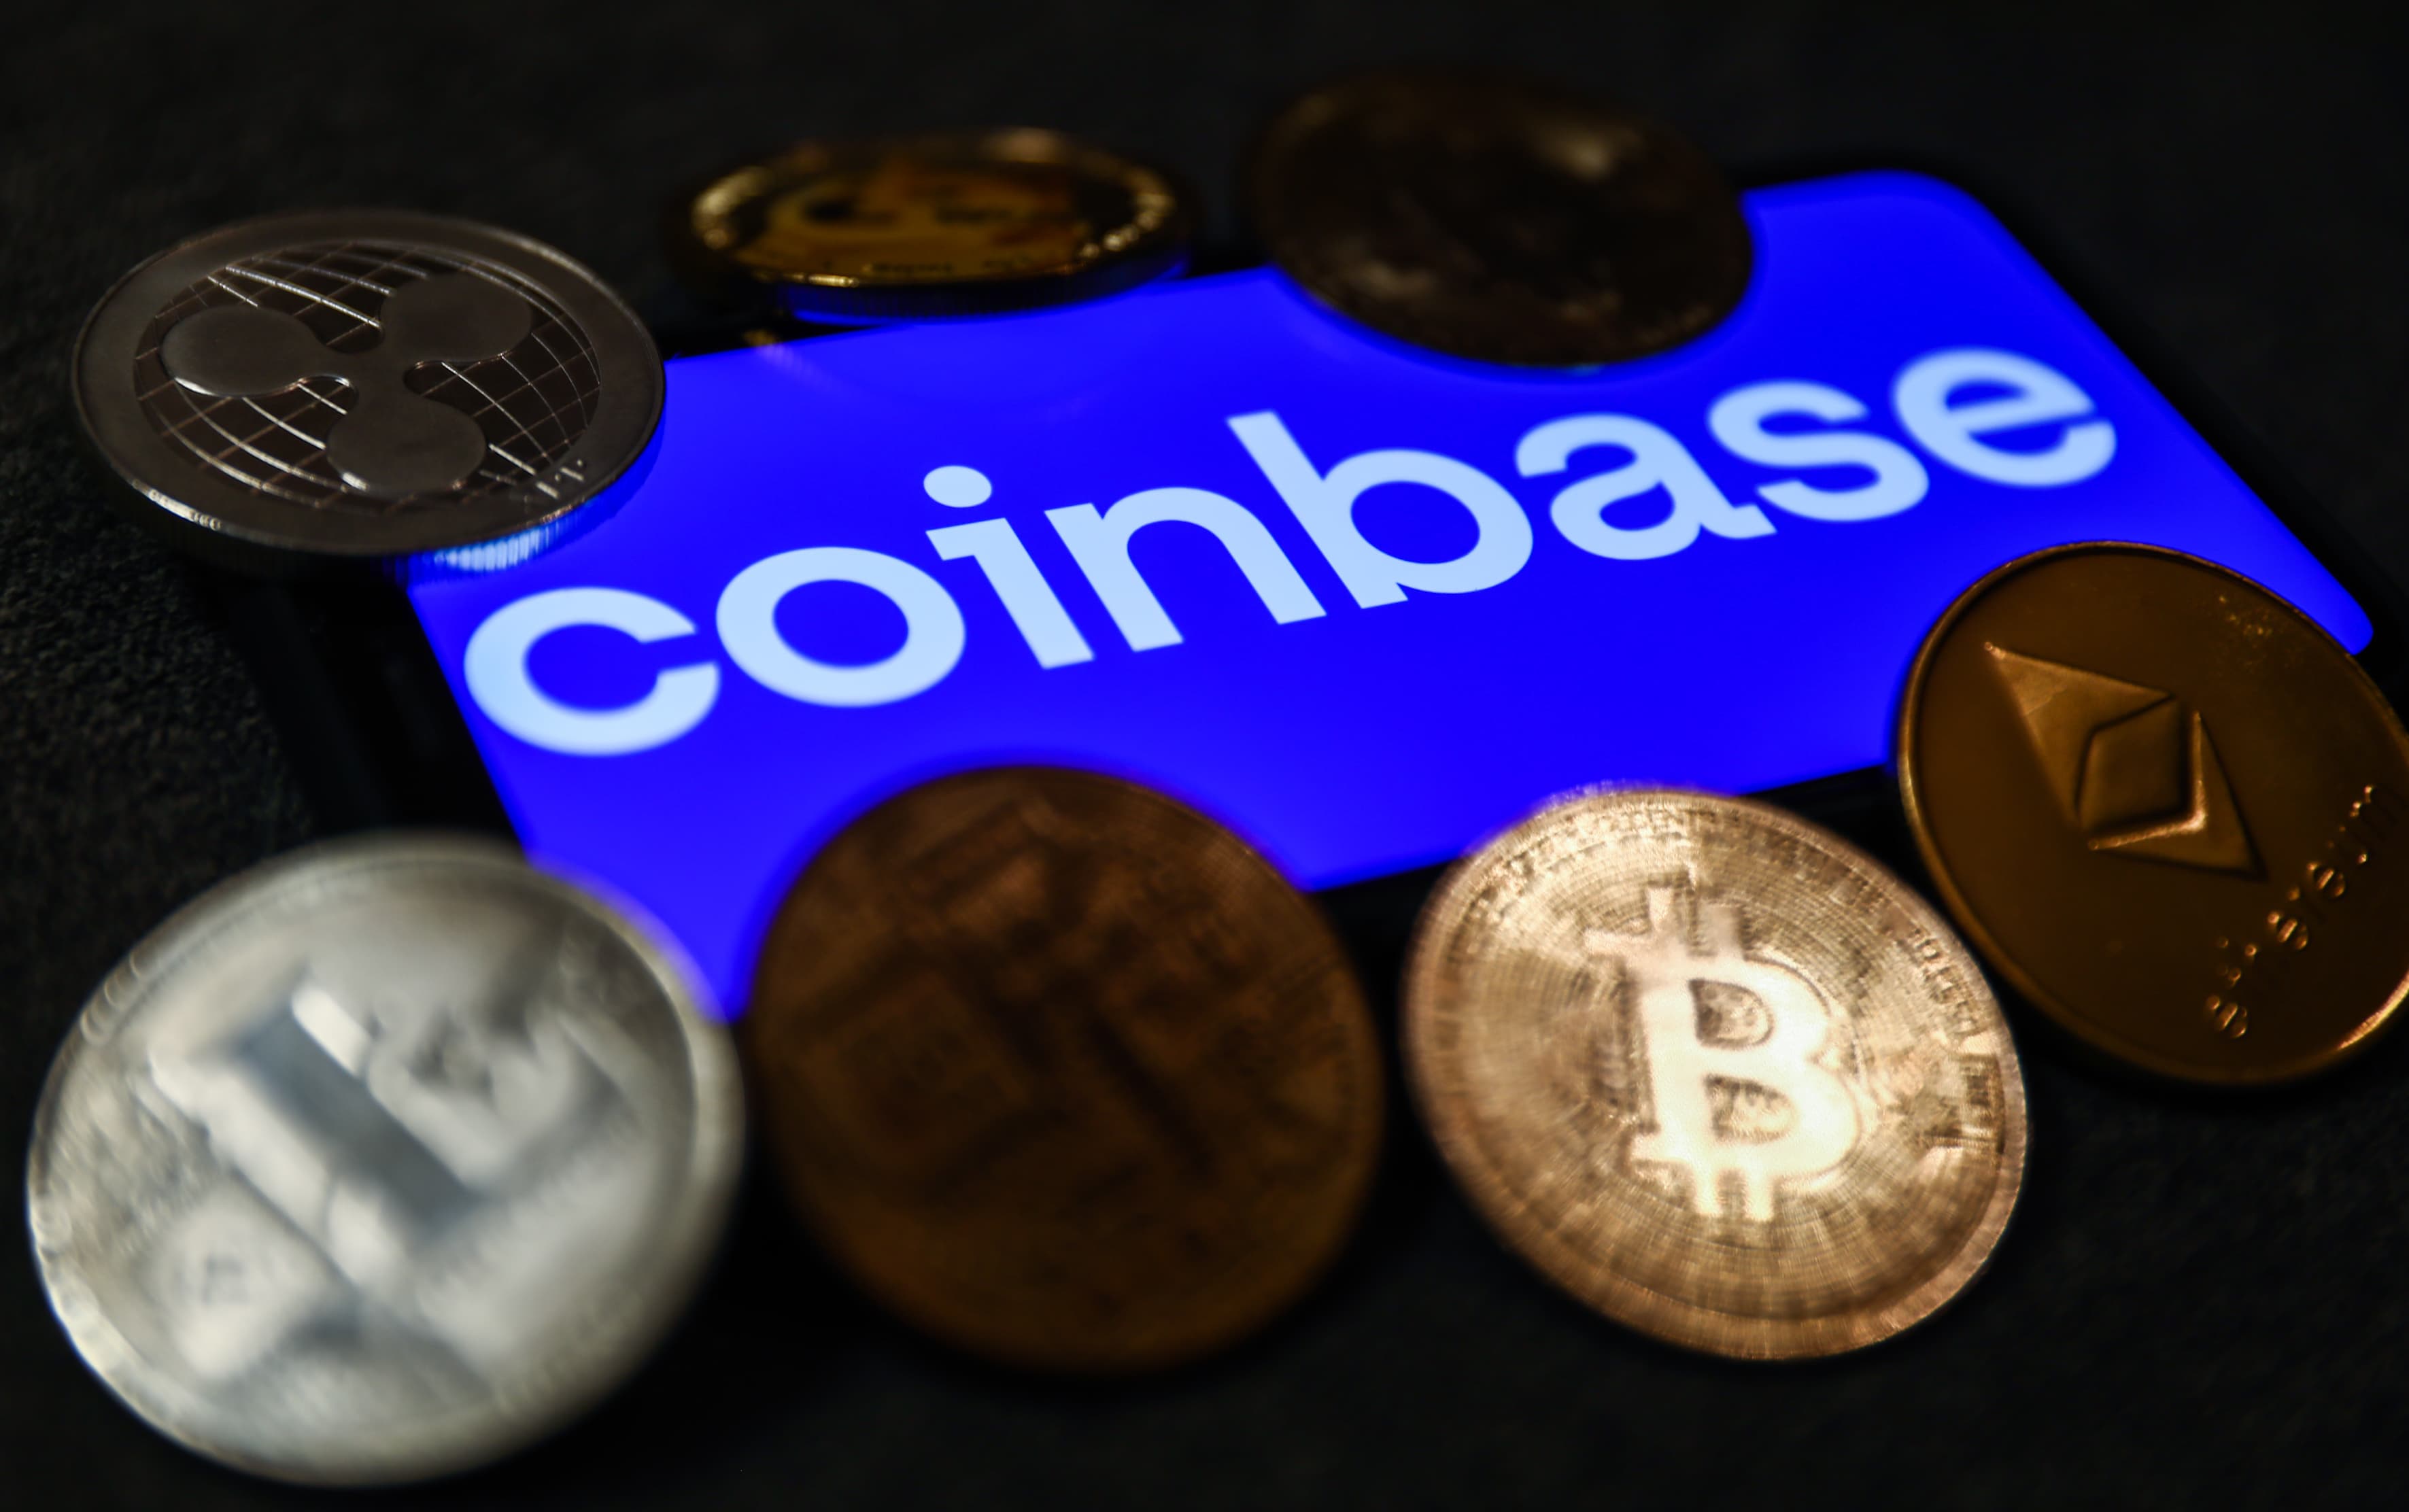 Coinbase shares will fall 40% even if bitcoin ETFs are approved, says Bank of America